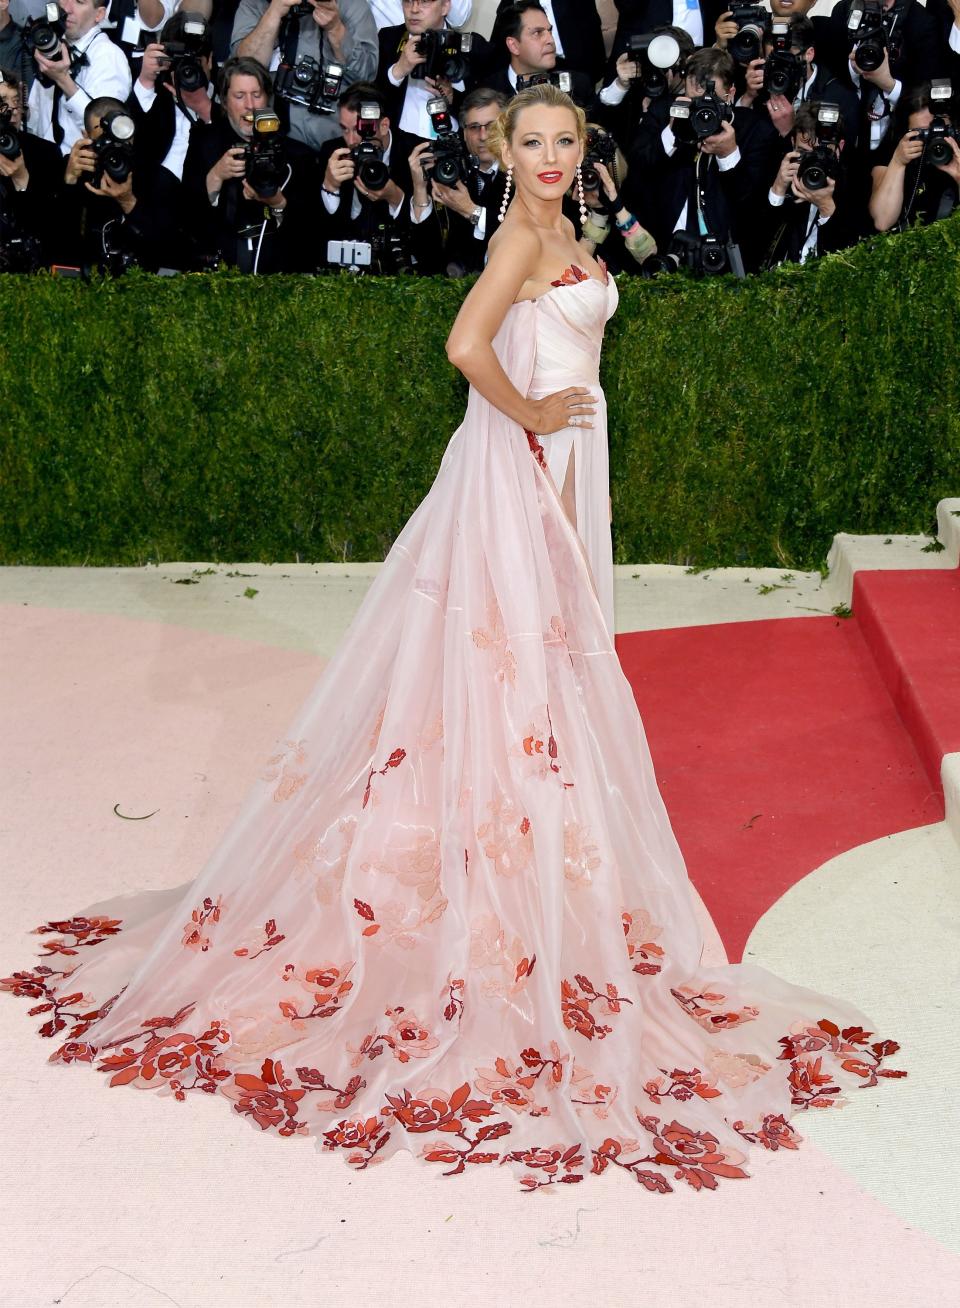 There’s no shortage of exquisite ways to wear a train at the Met Gala and we've rounded up our favorite looks.